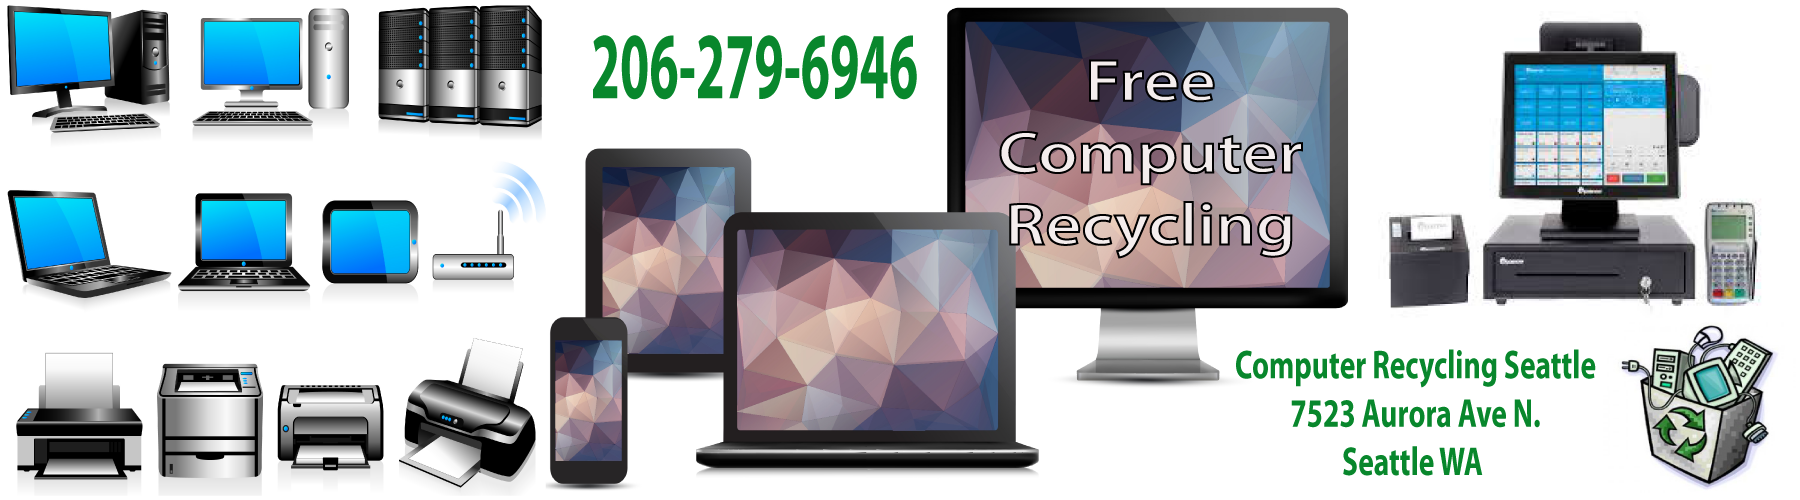 E-waste Recycling Seattle